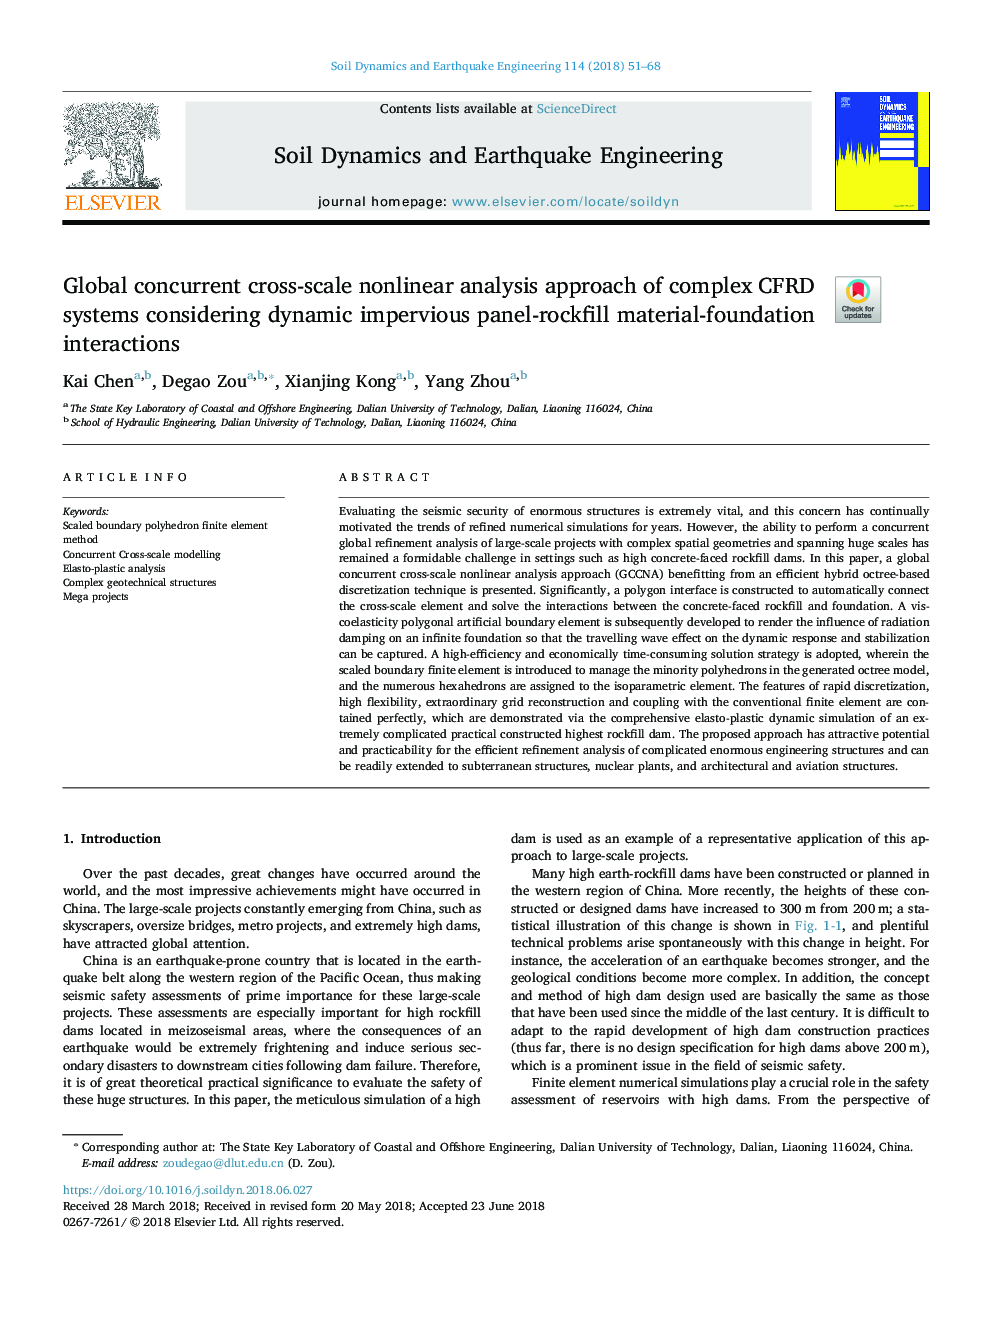 Global concurrent cross-scale nonlinear analysis approach of complex CFRD systems considering dynamic impervious panel-rockfill material-foundation interactions